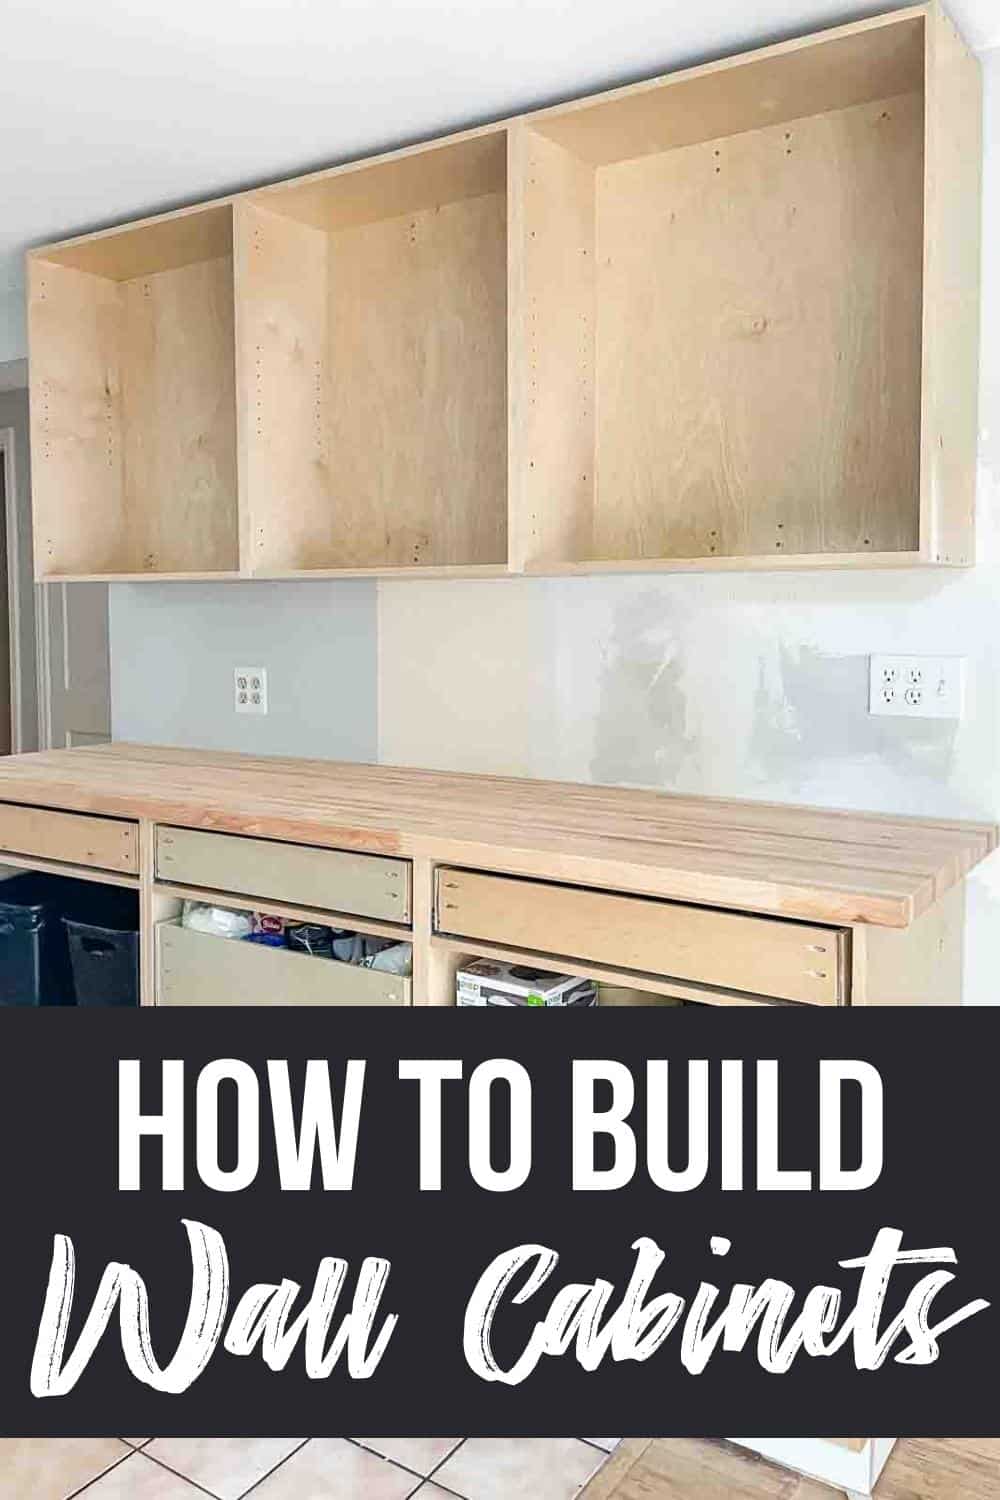 How to build a wall cabinet